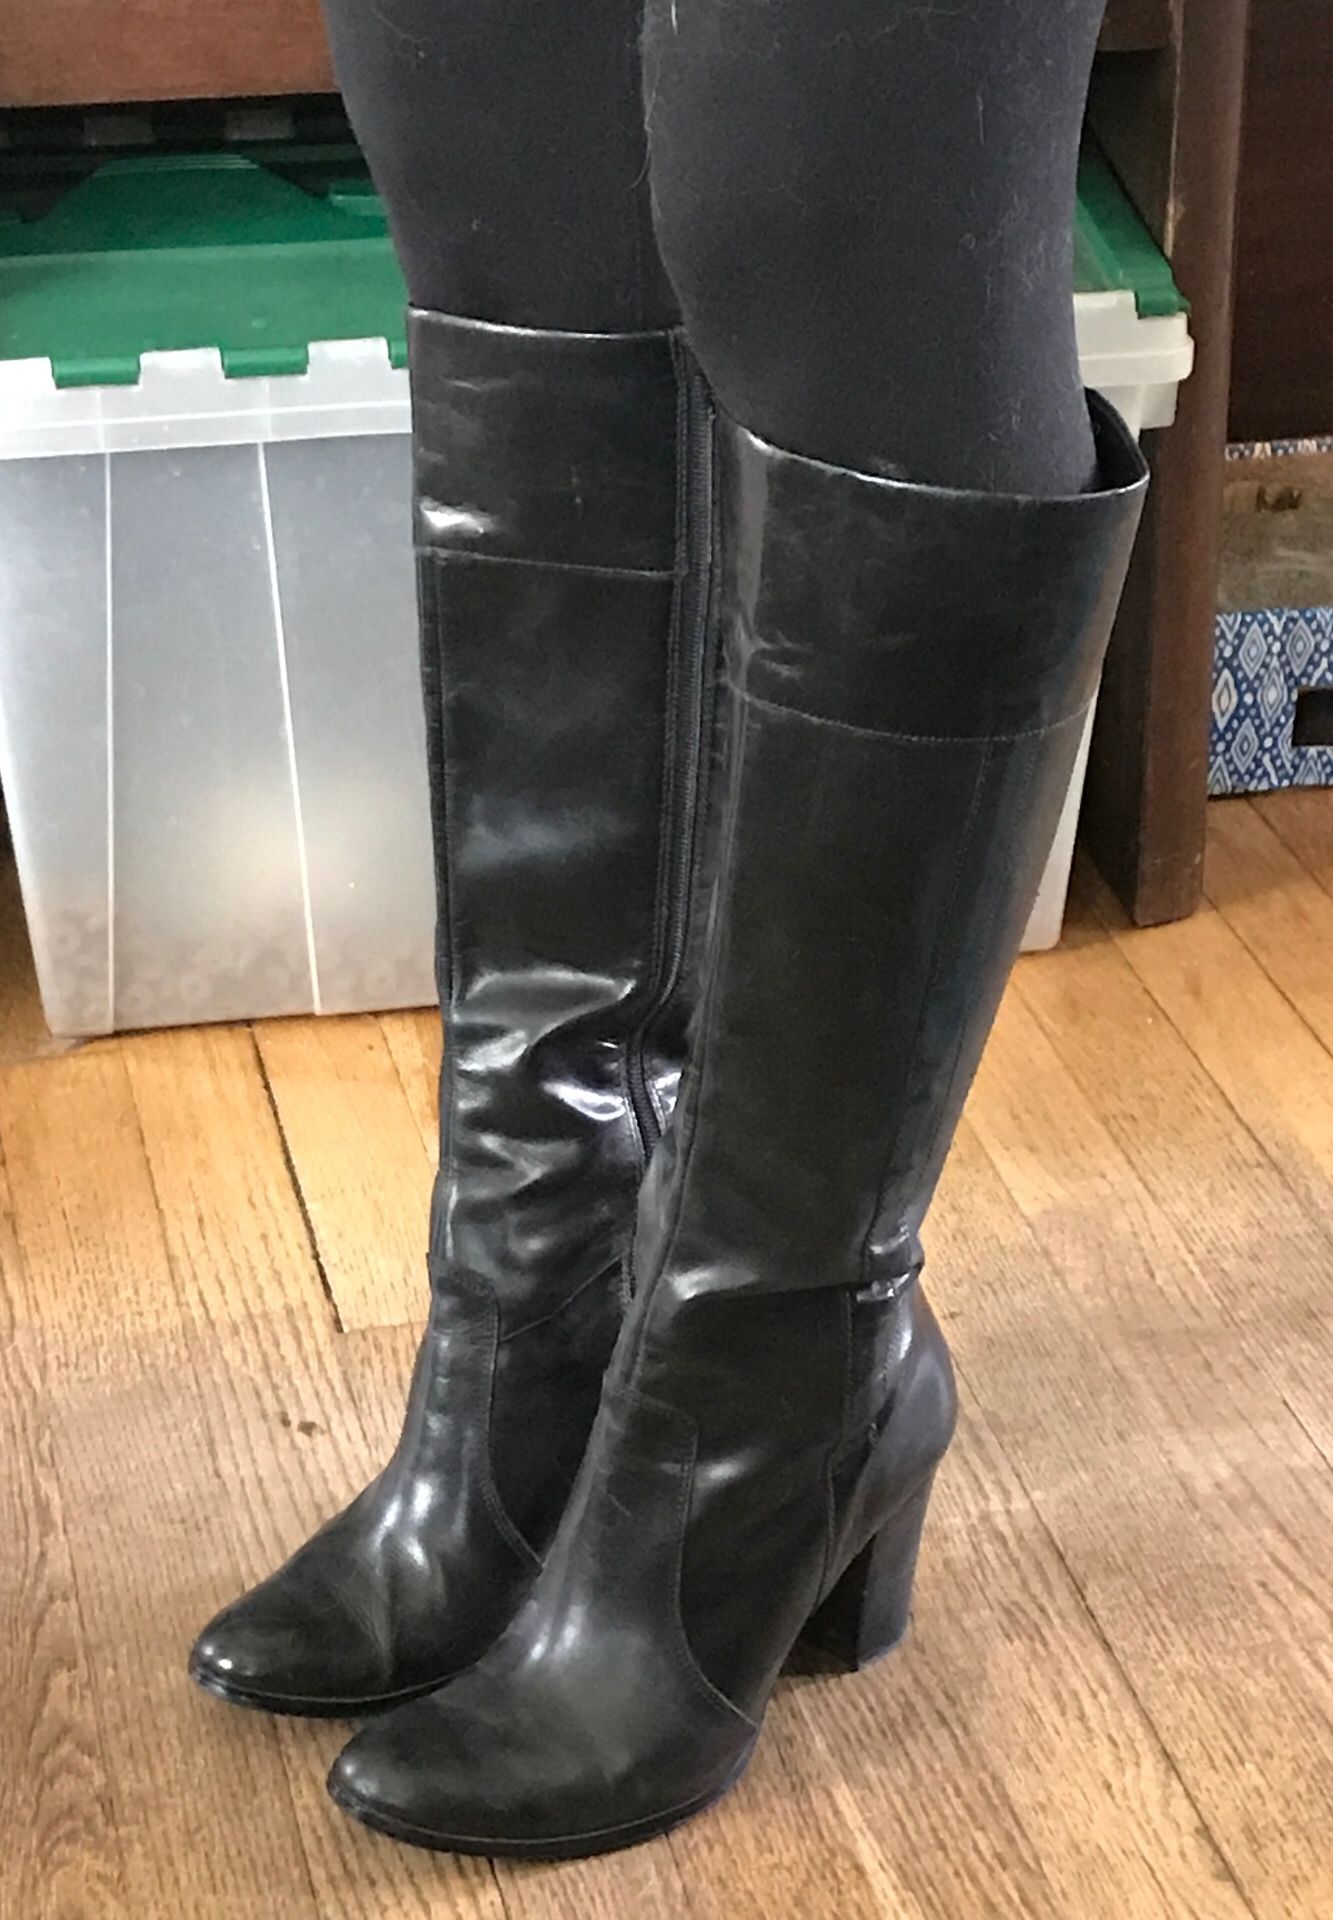 8.5 lady’s leather boots rarely worn